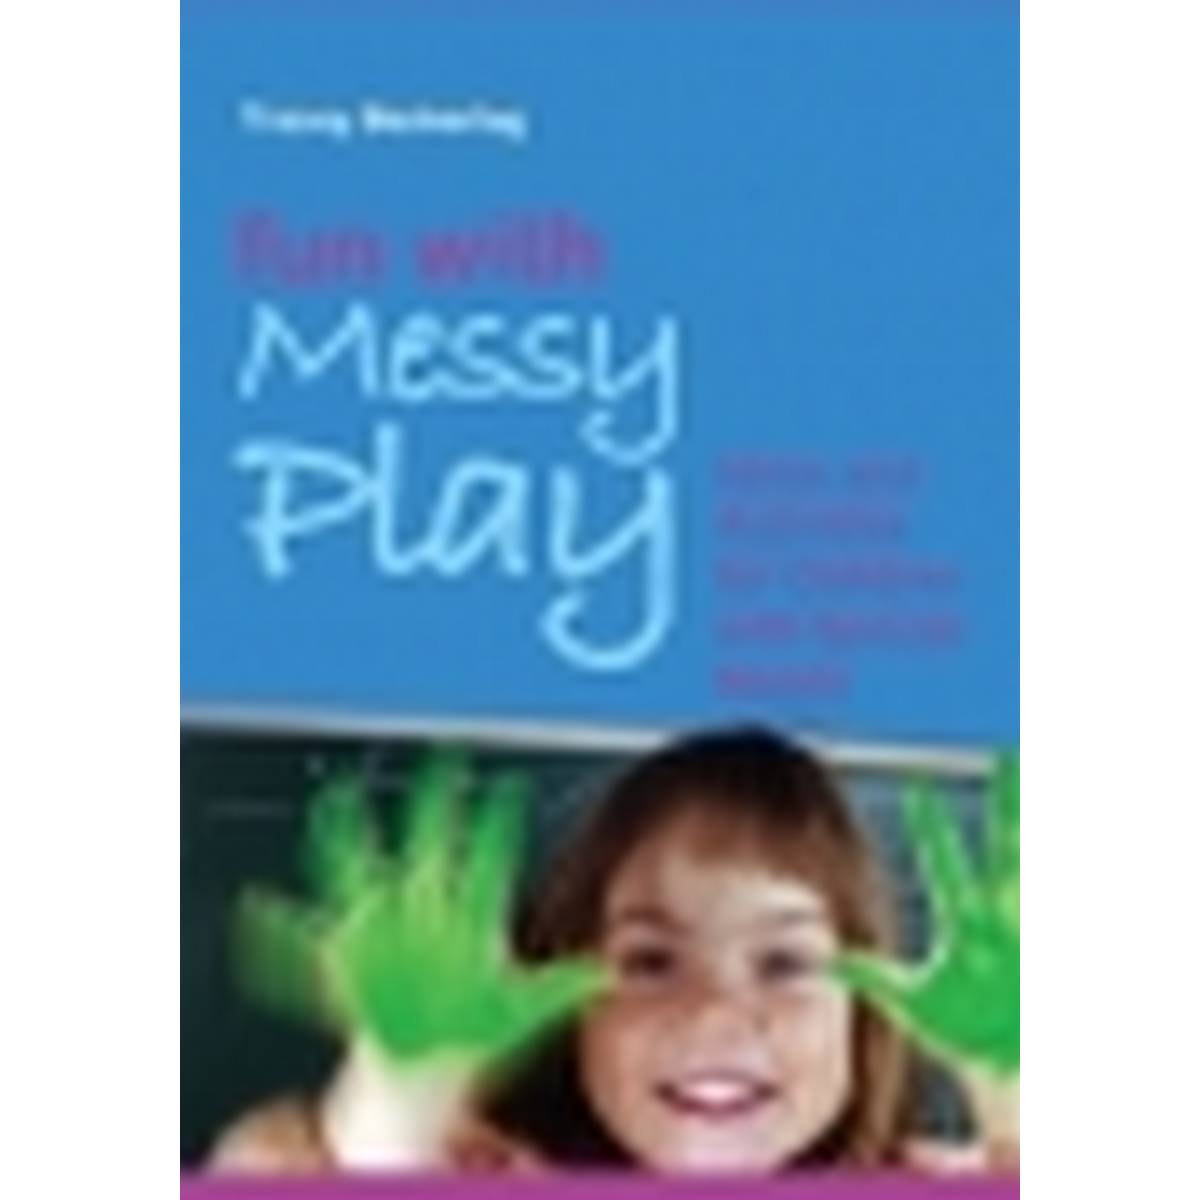 Fun with Messy Play